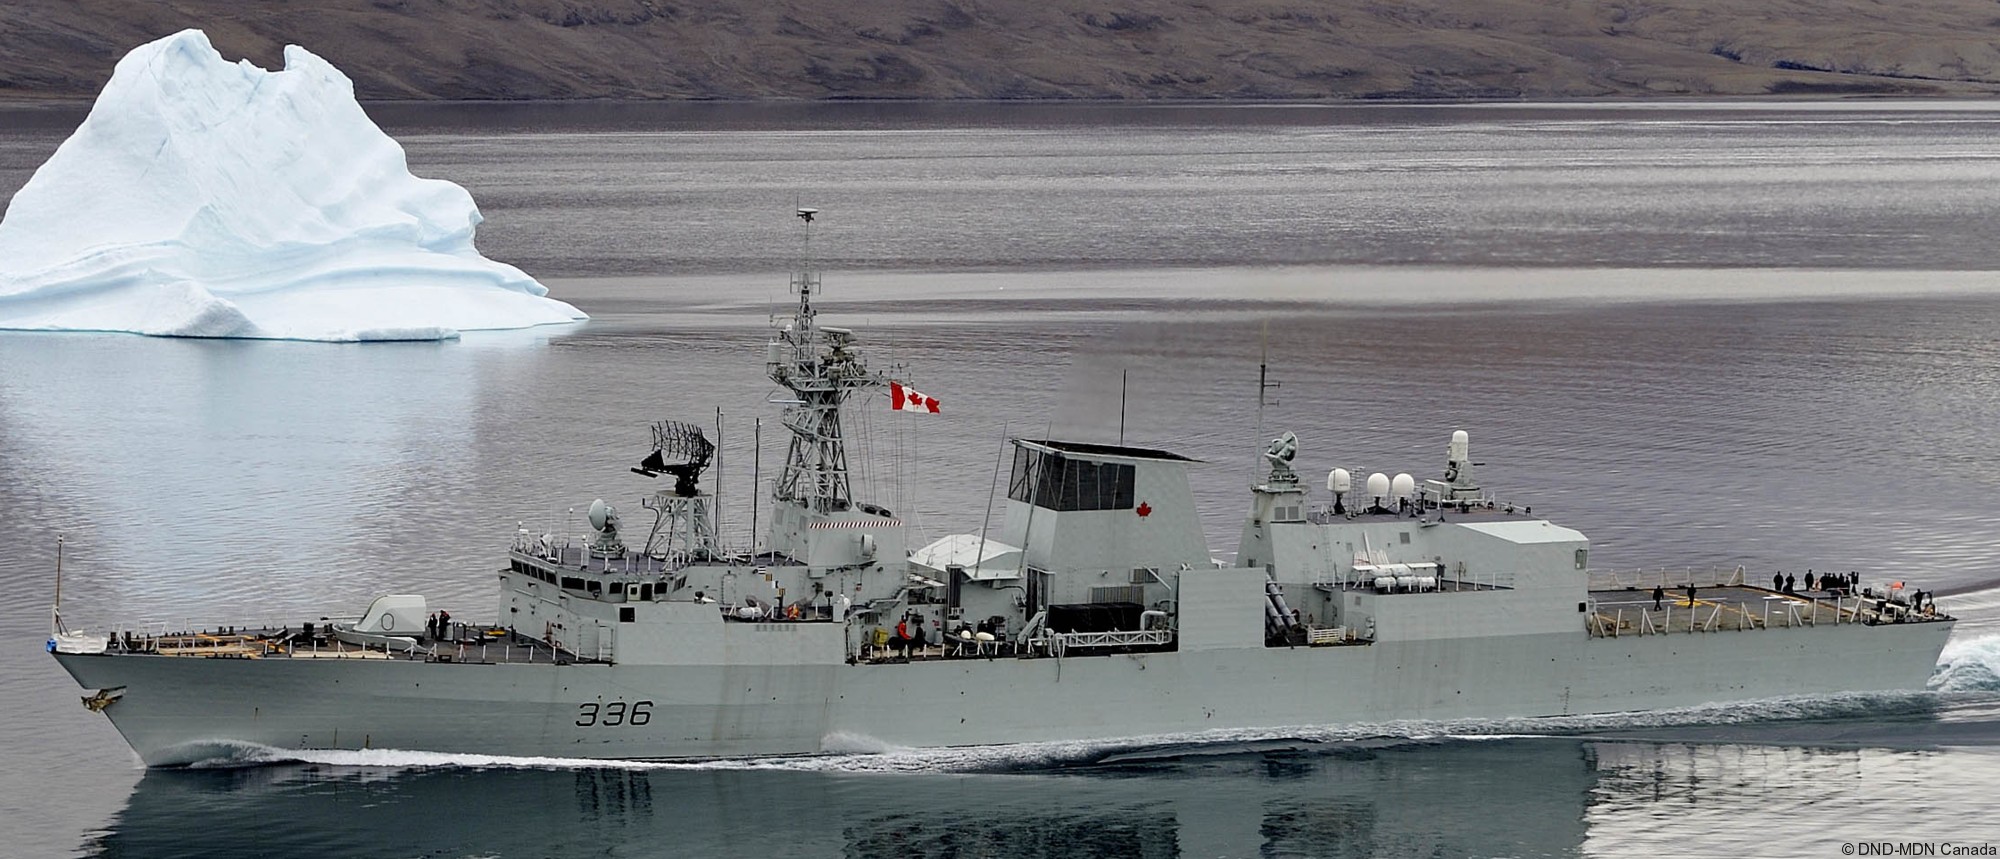 ffh-336 hmcs montreal halifax class helicopter patrol frigate ncsm royal canadian navy 51